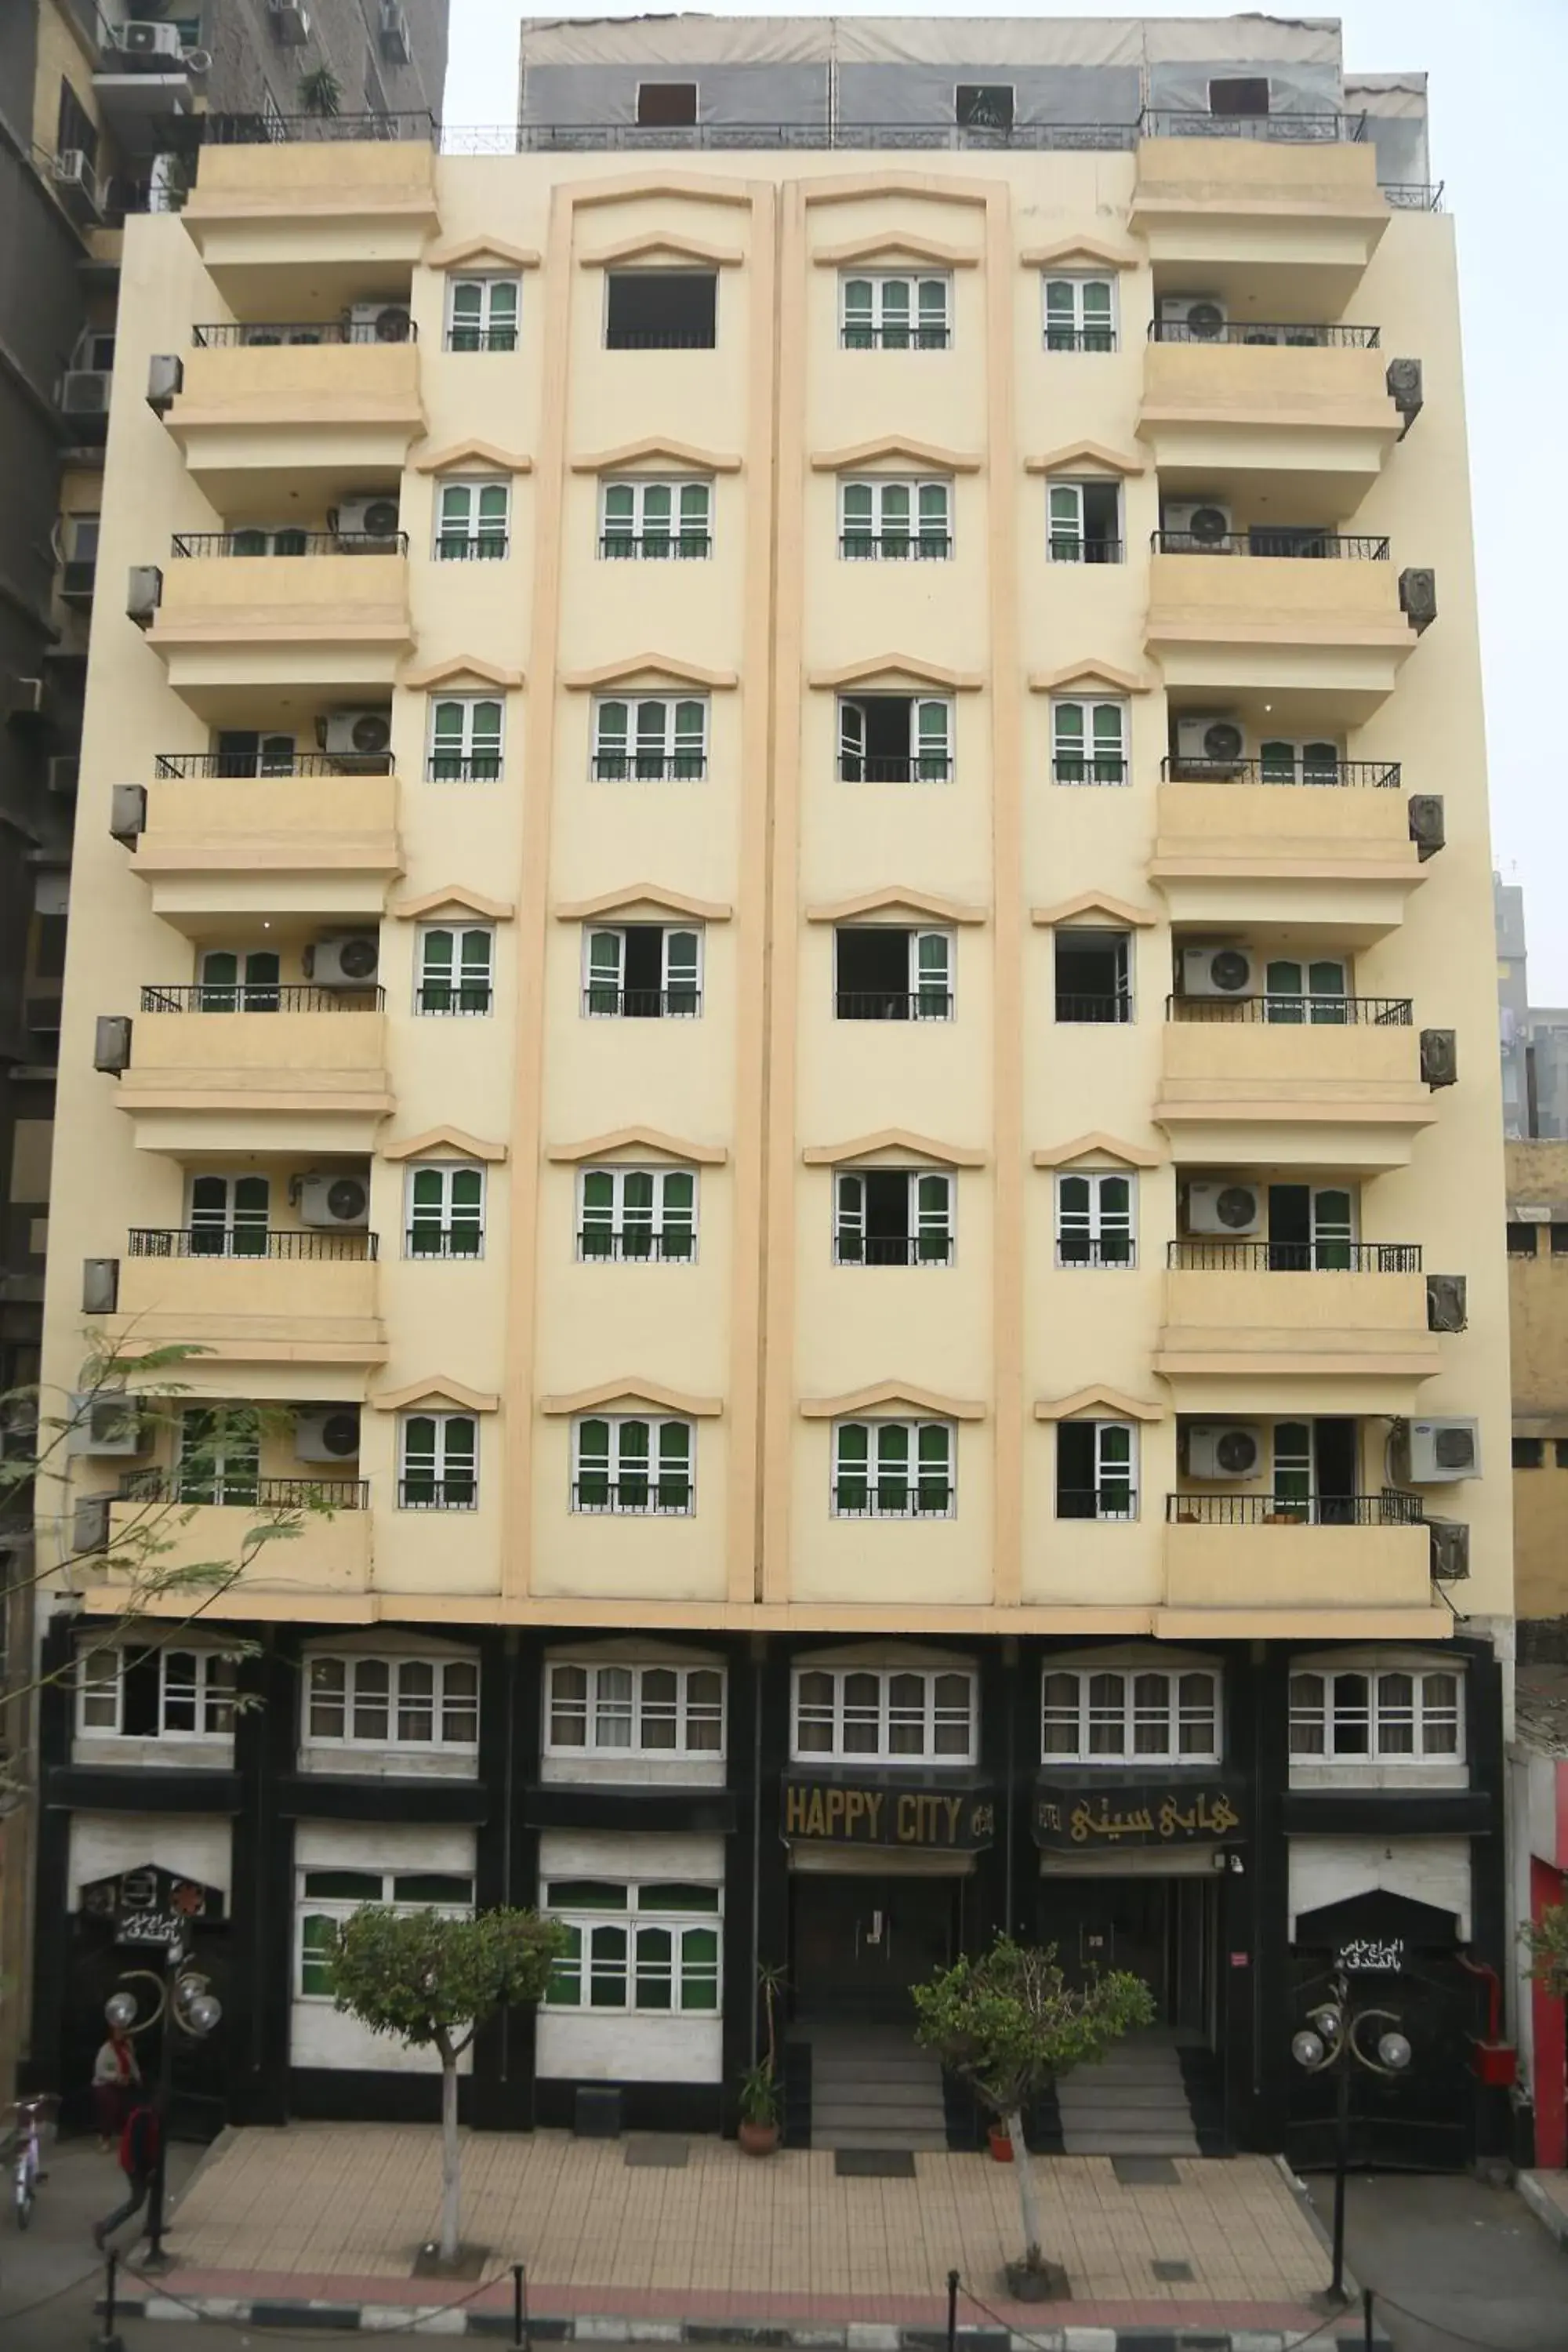 Property building in Happy City Hotel